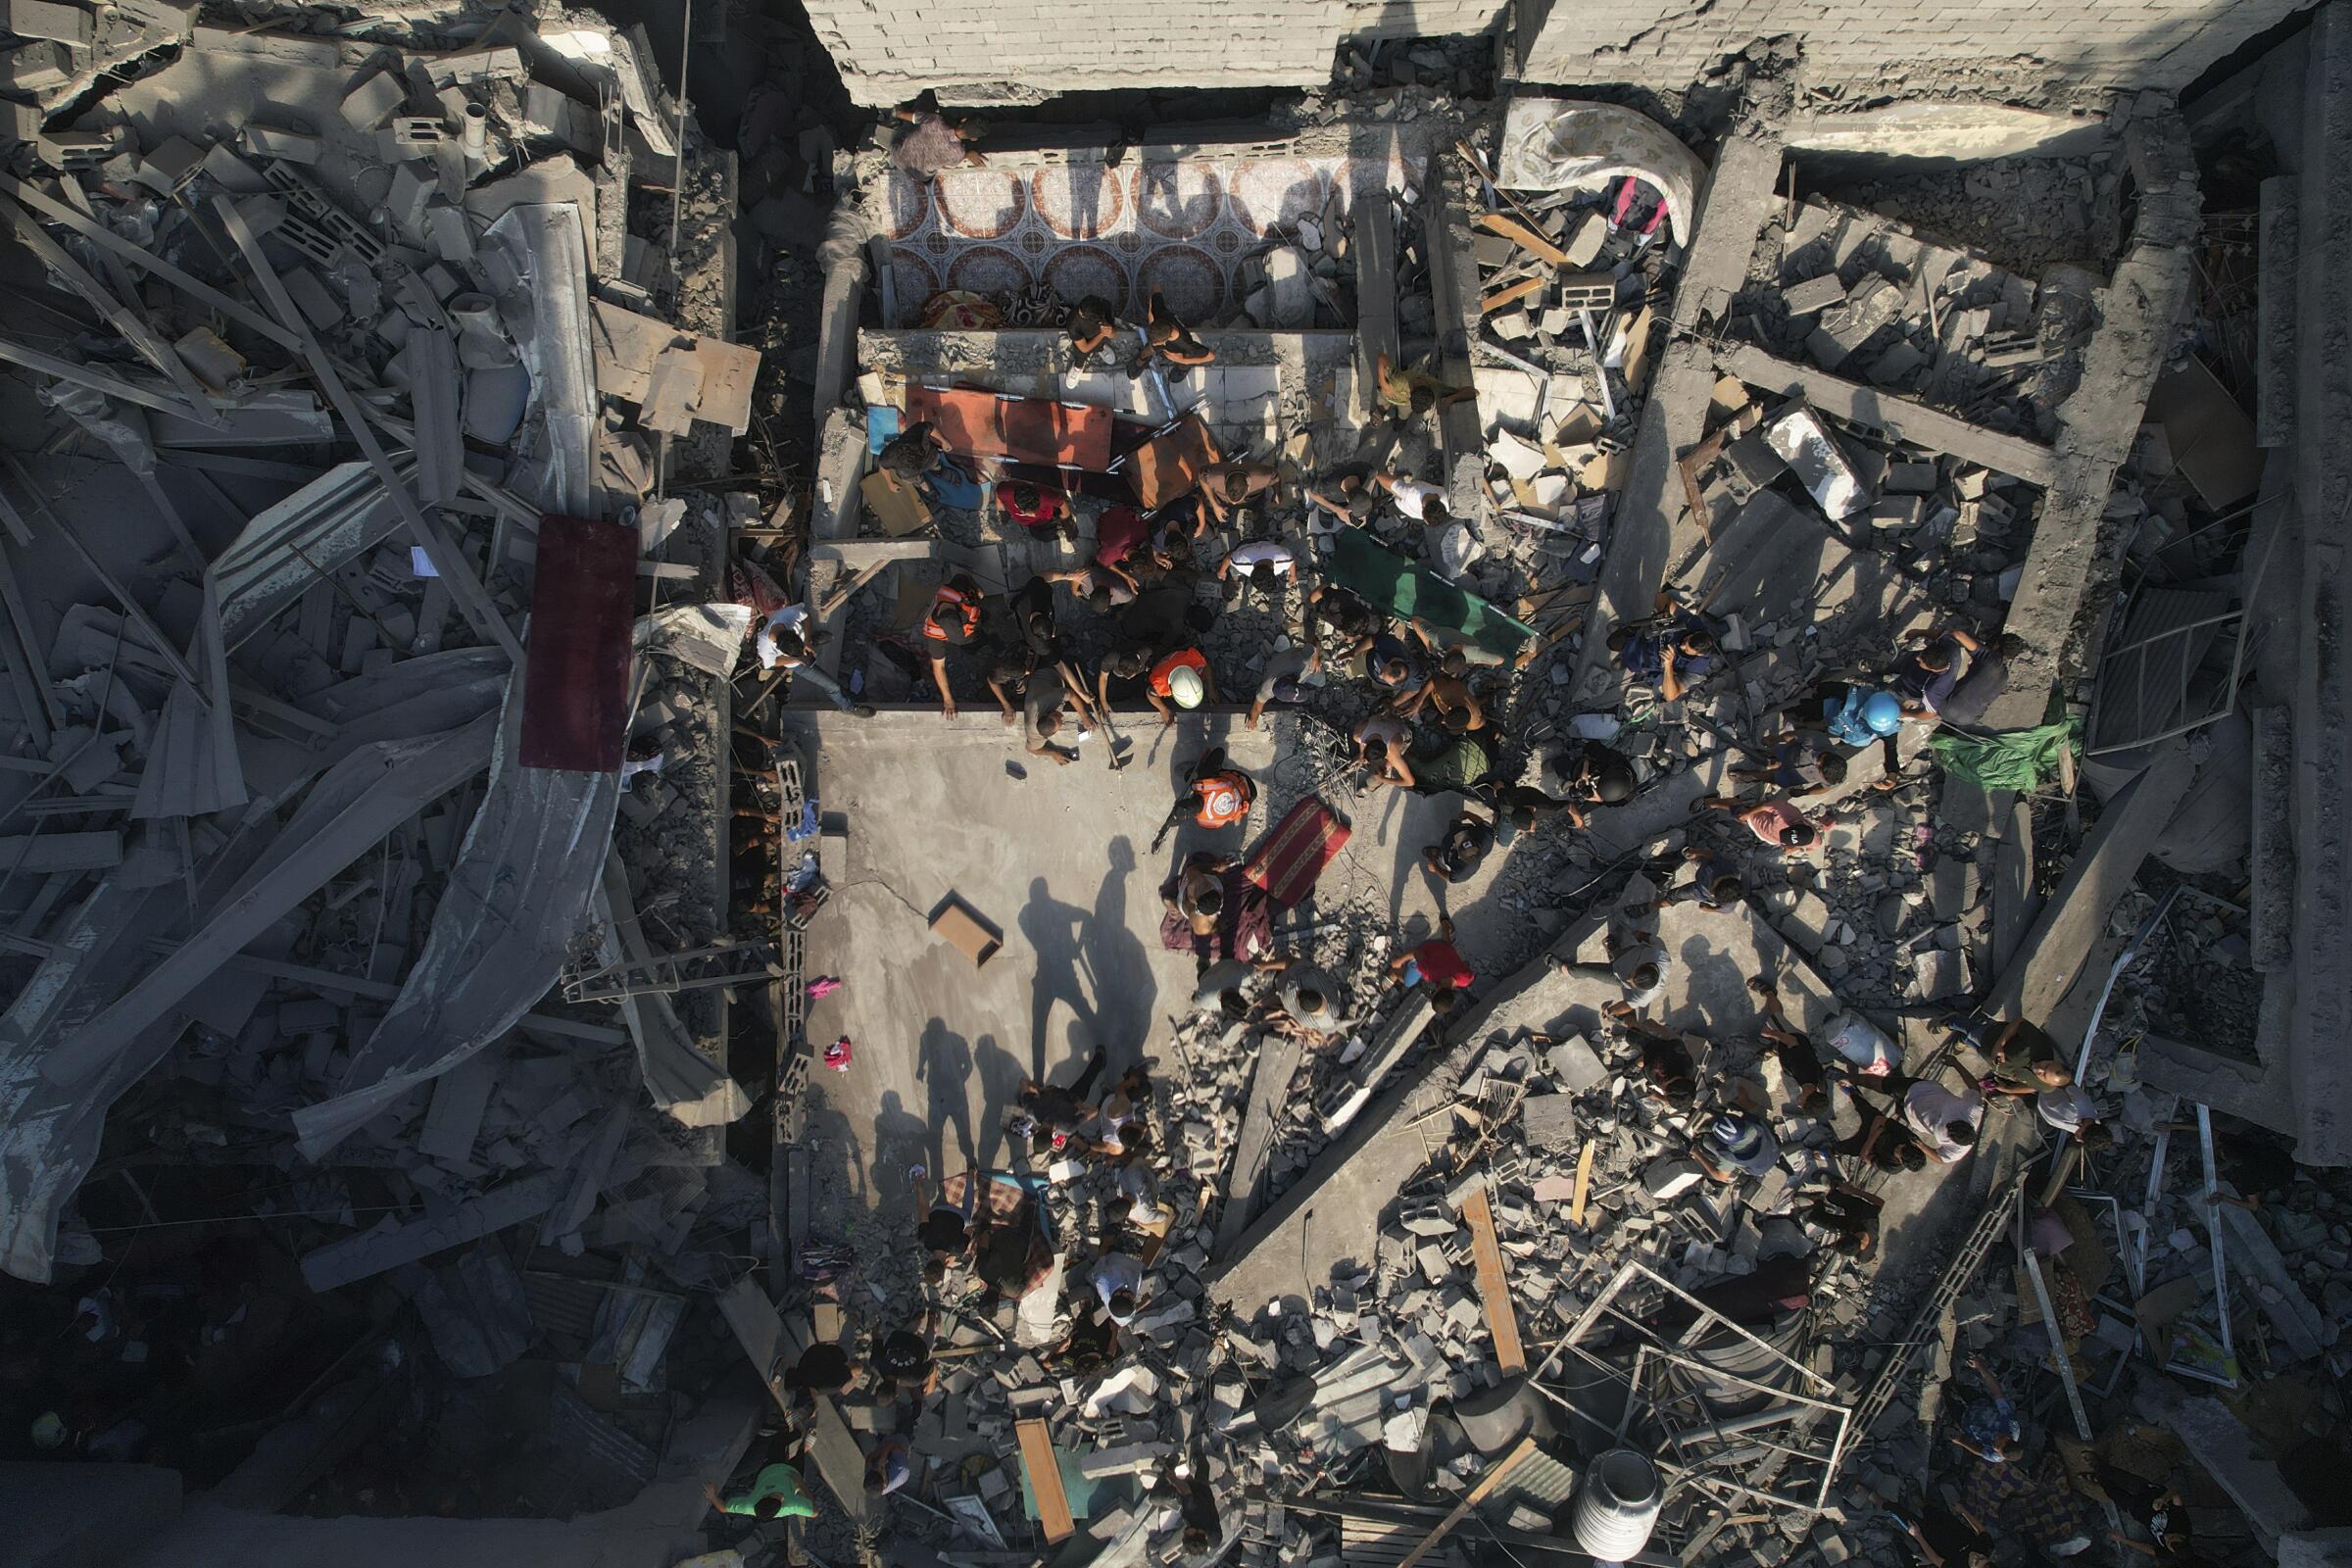 An aerial shot of over a dozen people working in the rubble of a destroyed building